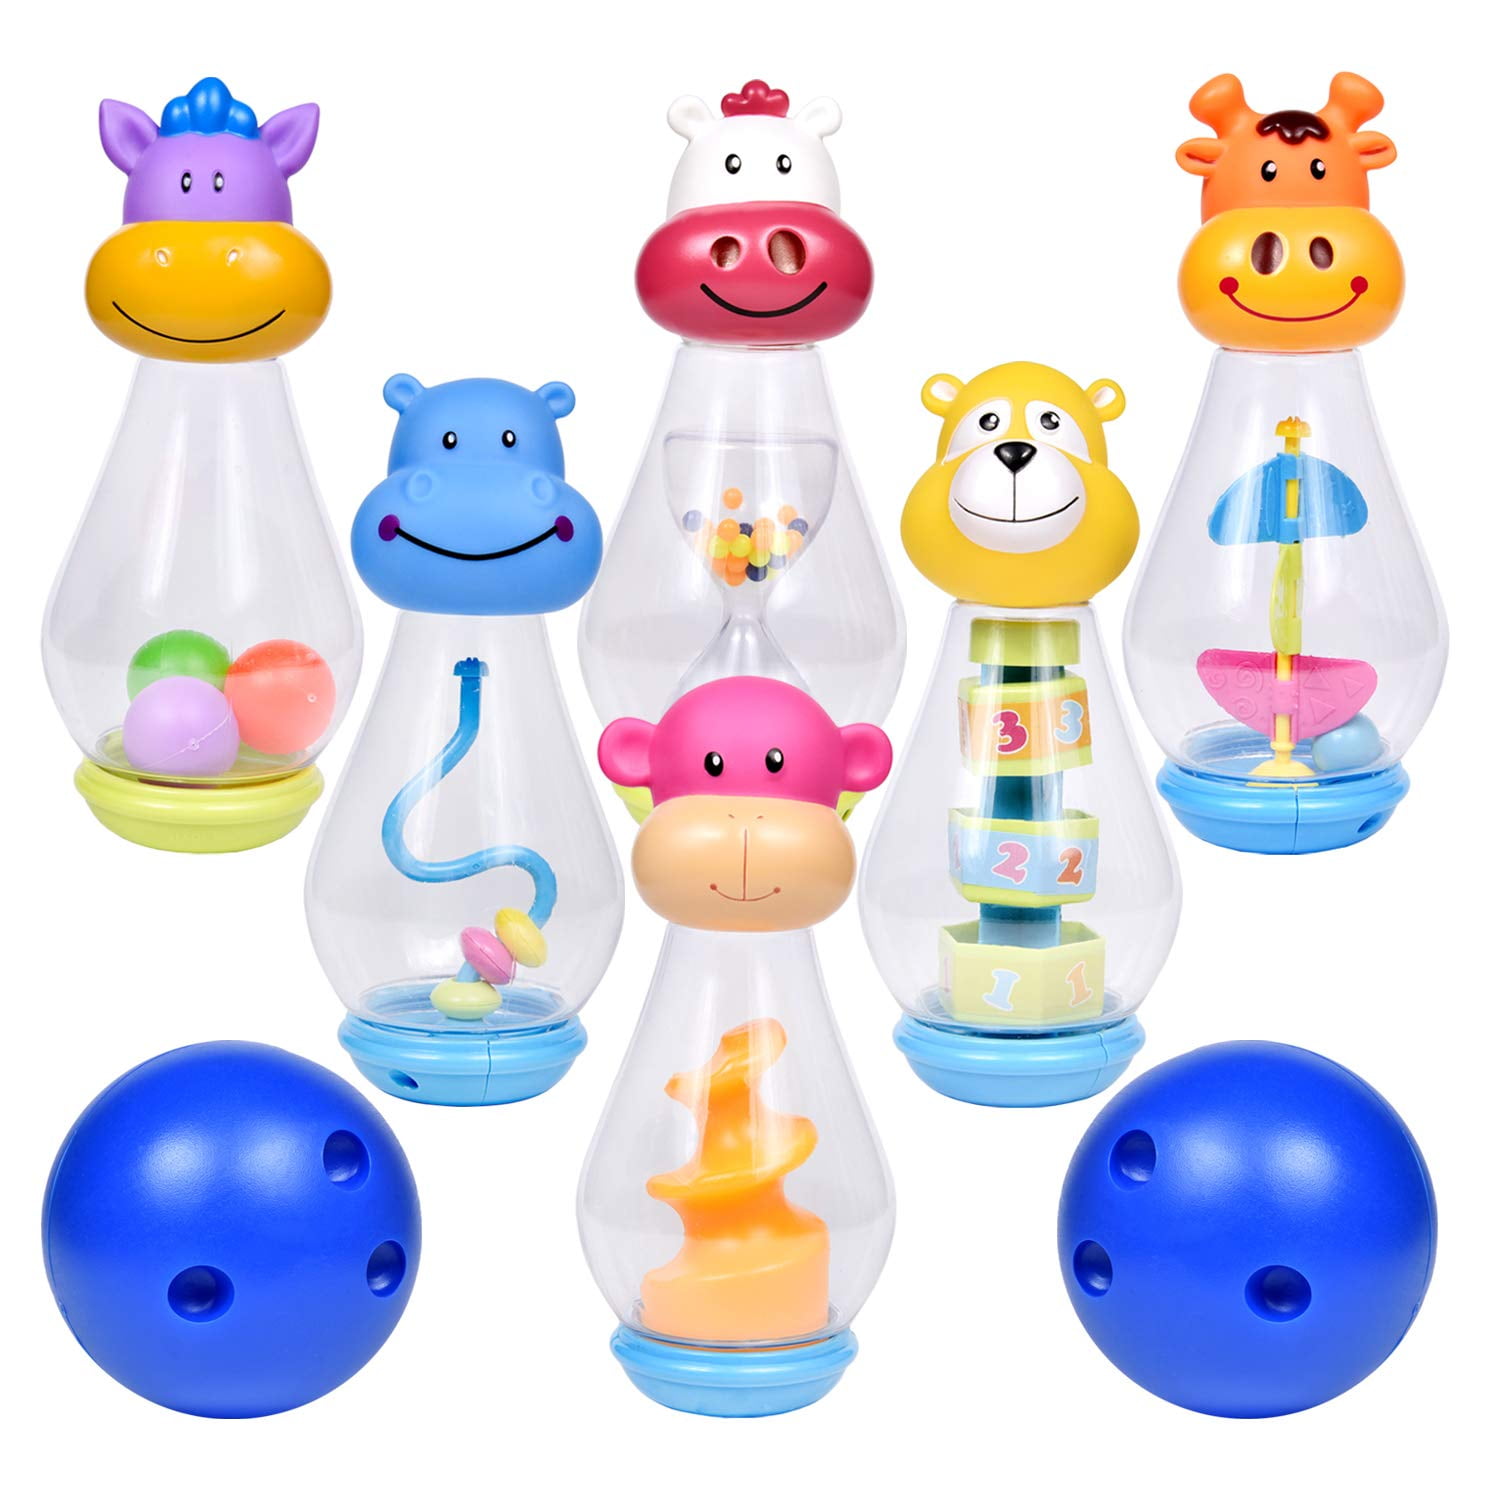 Bowling Set for Toddlers with 6 Animal Head Bowling Pins and 2 Bowling  Balls, Outdoor Toys for Toddlers, Bowling Game for Kids F-249 